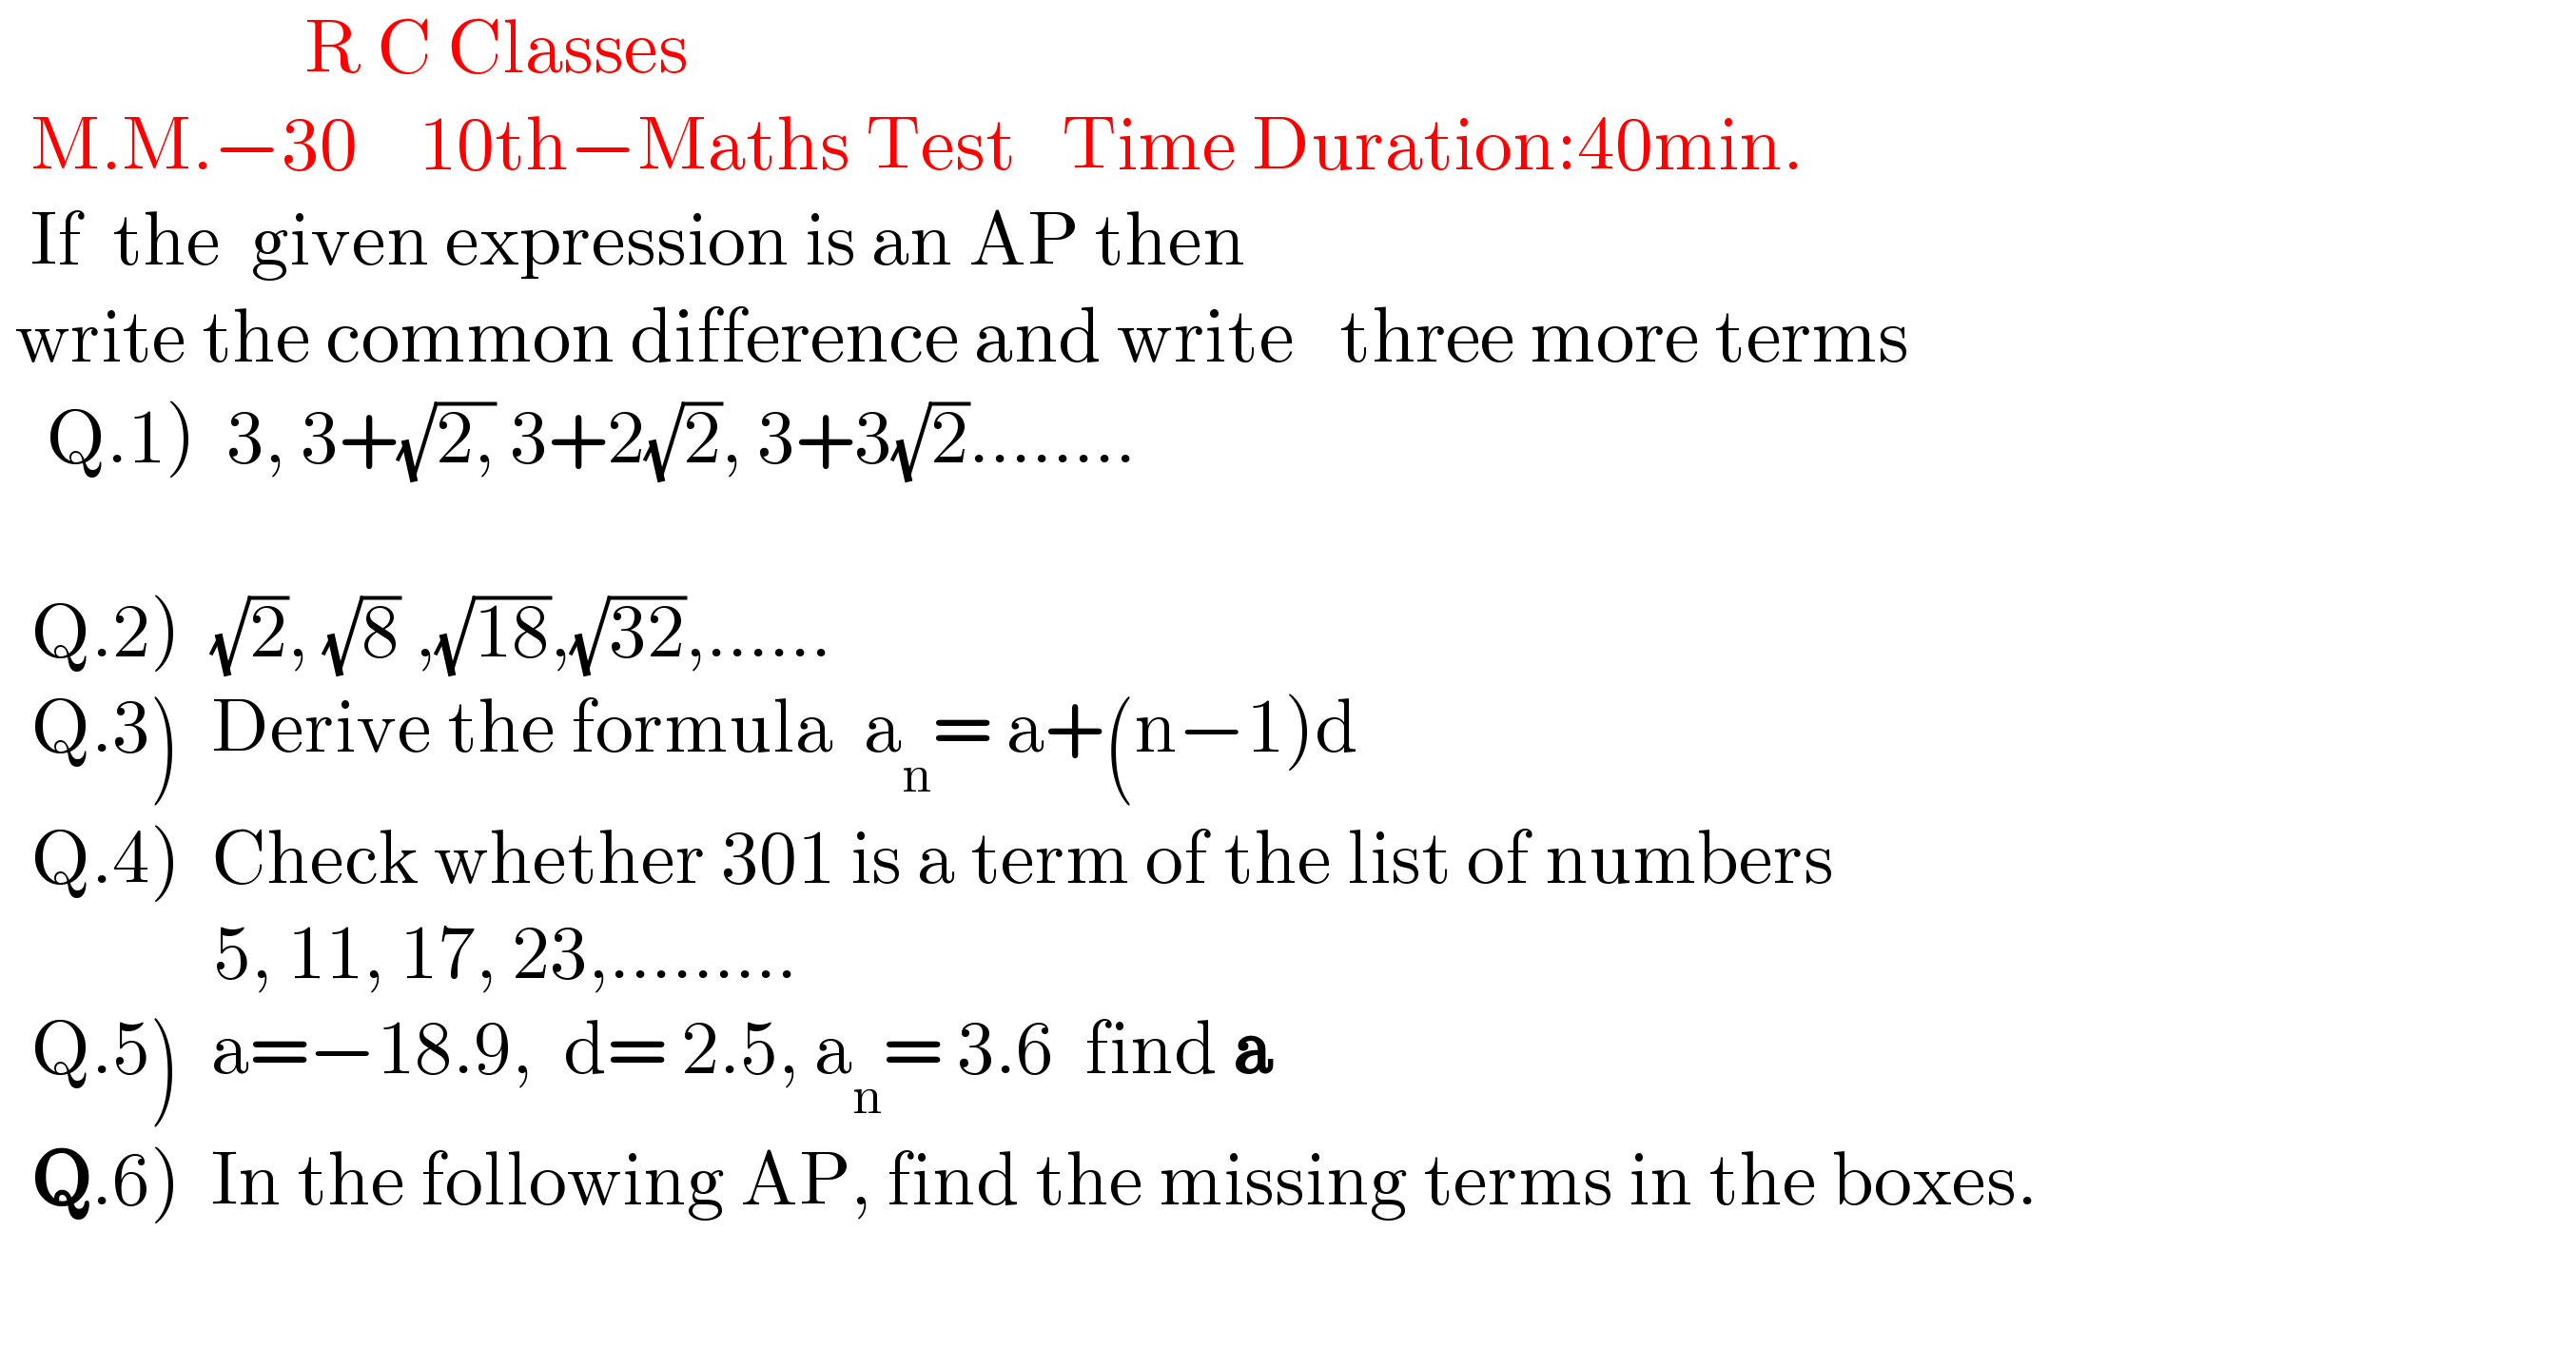                     R C Classes     M.M.−30    10th−Maths Test   Time Duration:40min.    If  the  given expression is an AP then   write the common difference and write   three more terms     Q.1)  3, 3+(√(2,)) 3+2(√2), 3+3(√2)........       Q.2)  (√2), (√8) ,(√(18)),(√(32)),......    Q.3)  Derive the formula  a_n = a+(n−1)d    Q.4)  Check whether 301 is a term of the list of numbers                5, 11, 17, 23,.........    Q.5)  a=−18.9,  d= 2.5, a_n = 3.6  find a    Q.6)  In the following AP, find the missing terms in the boxes.                 